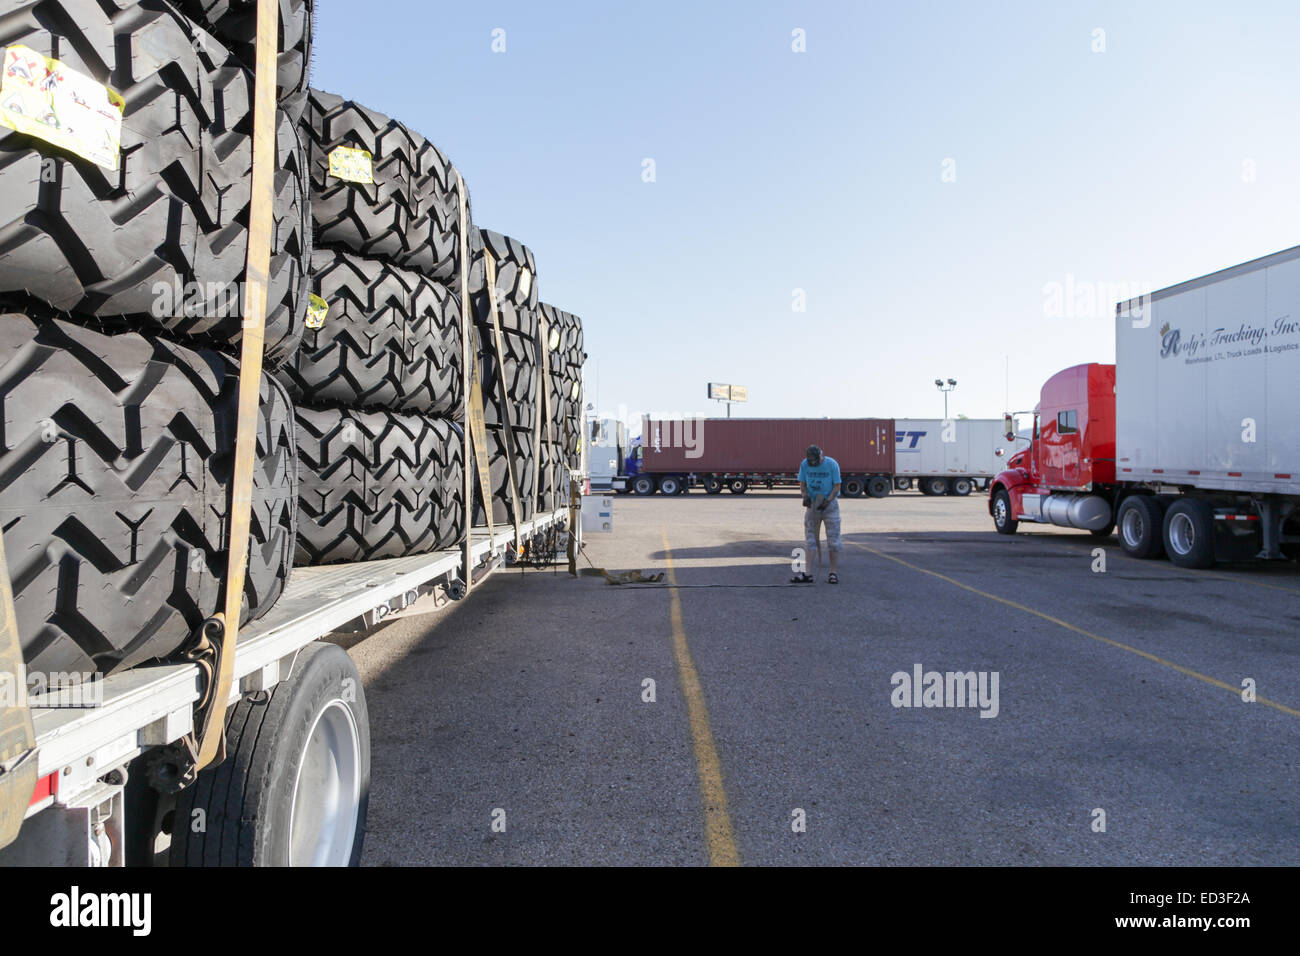 Truck load of large mining tyres on flatdeck trailer and driver throwing straps over load to secure it. Stock Photo